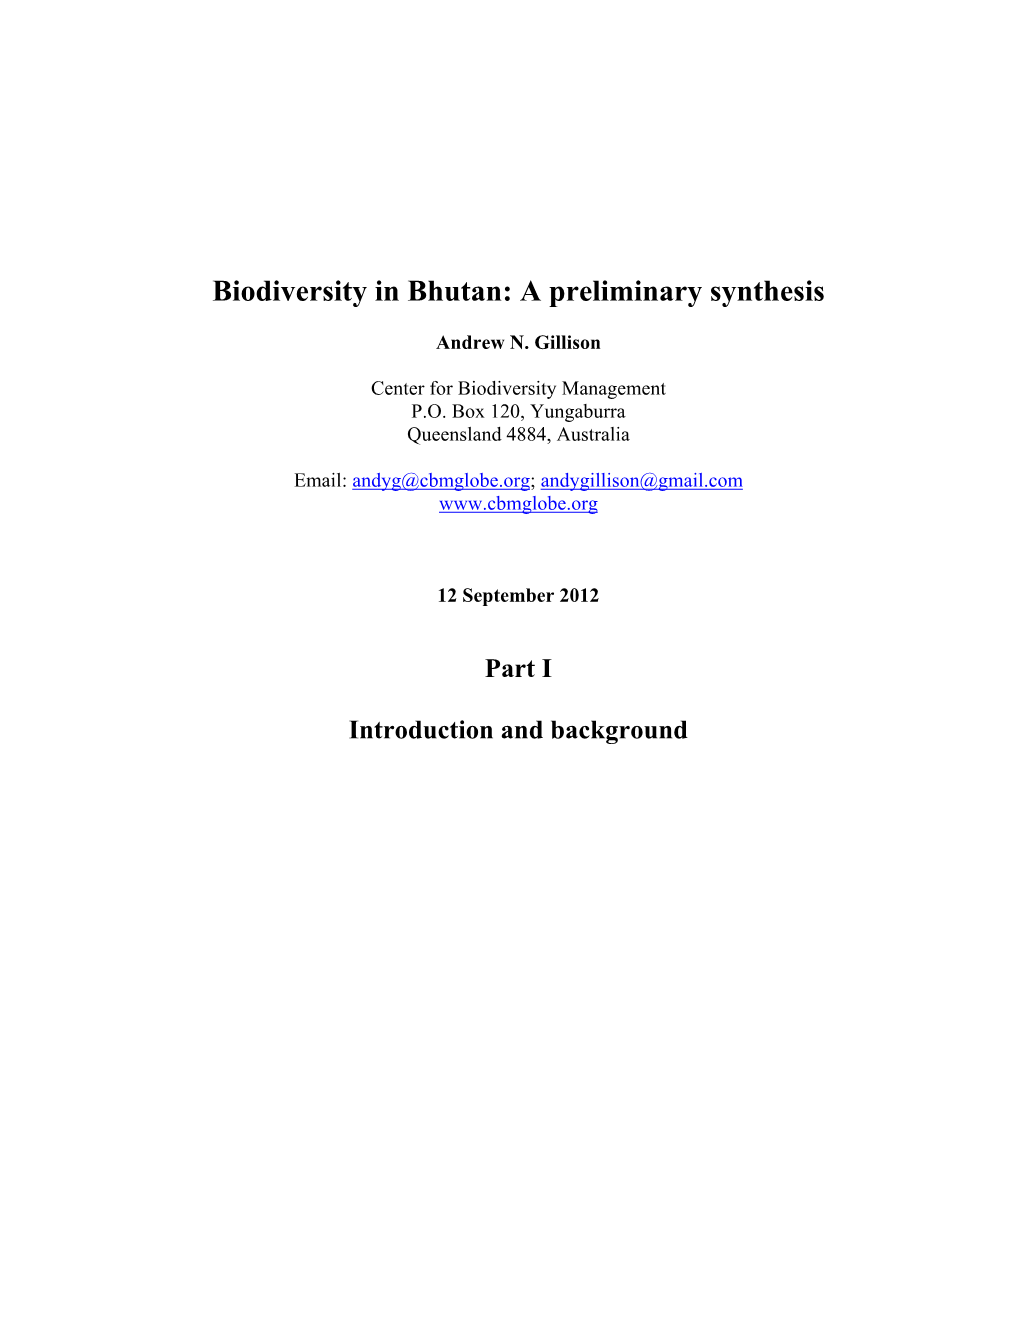 Biodiversity in Bhutan: a Preliminary Synthesis